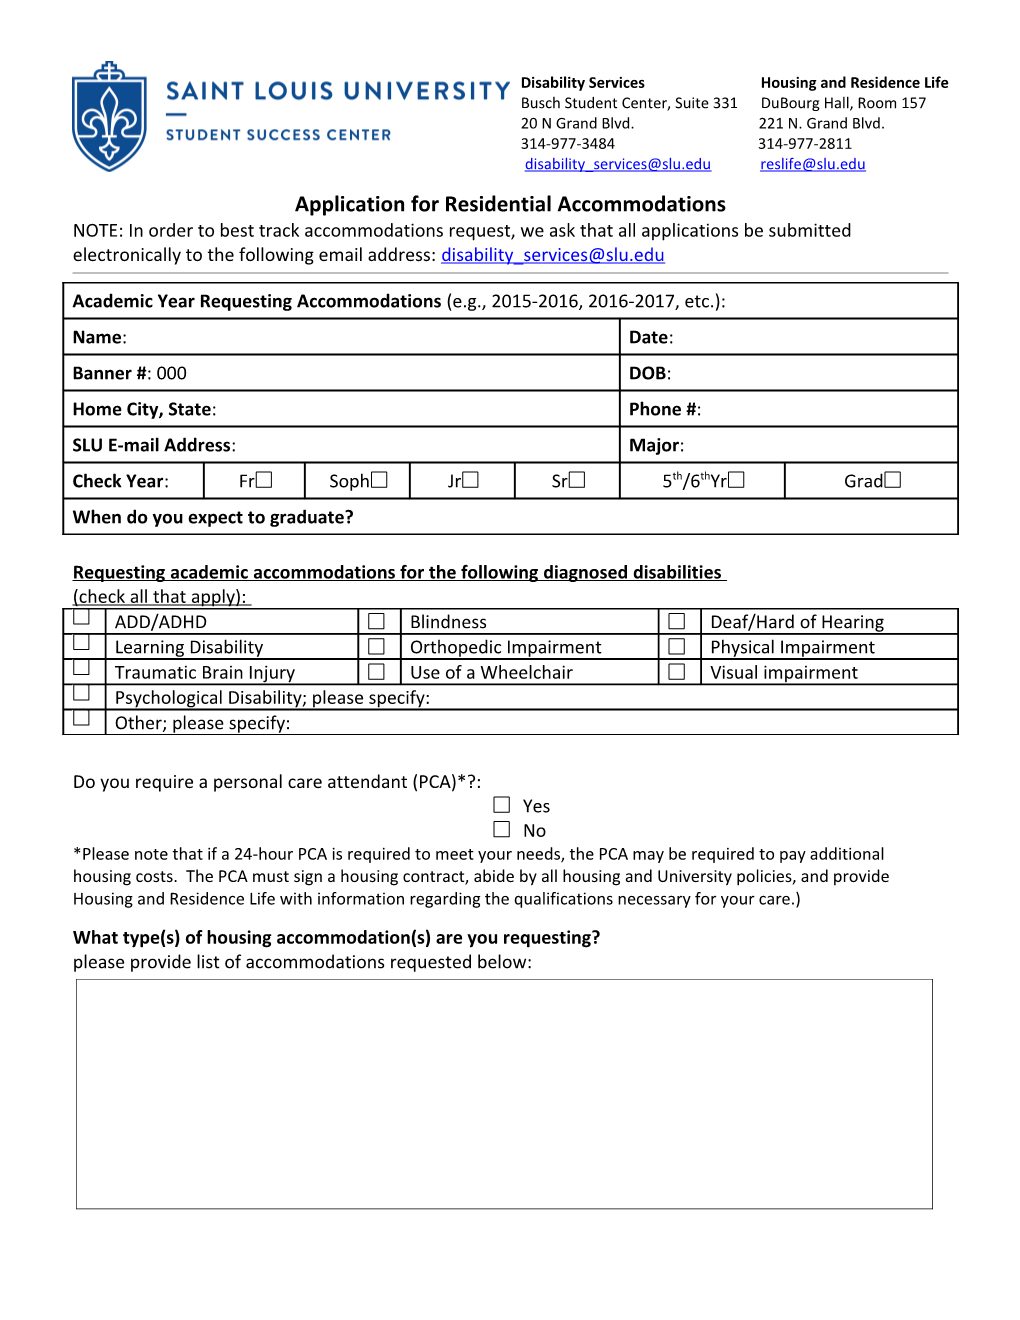 Application for Residential Accommodations